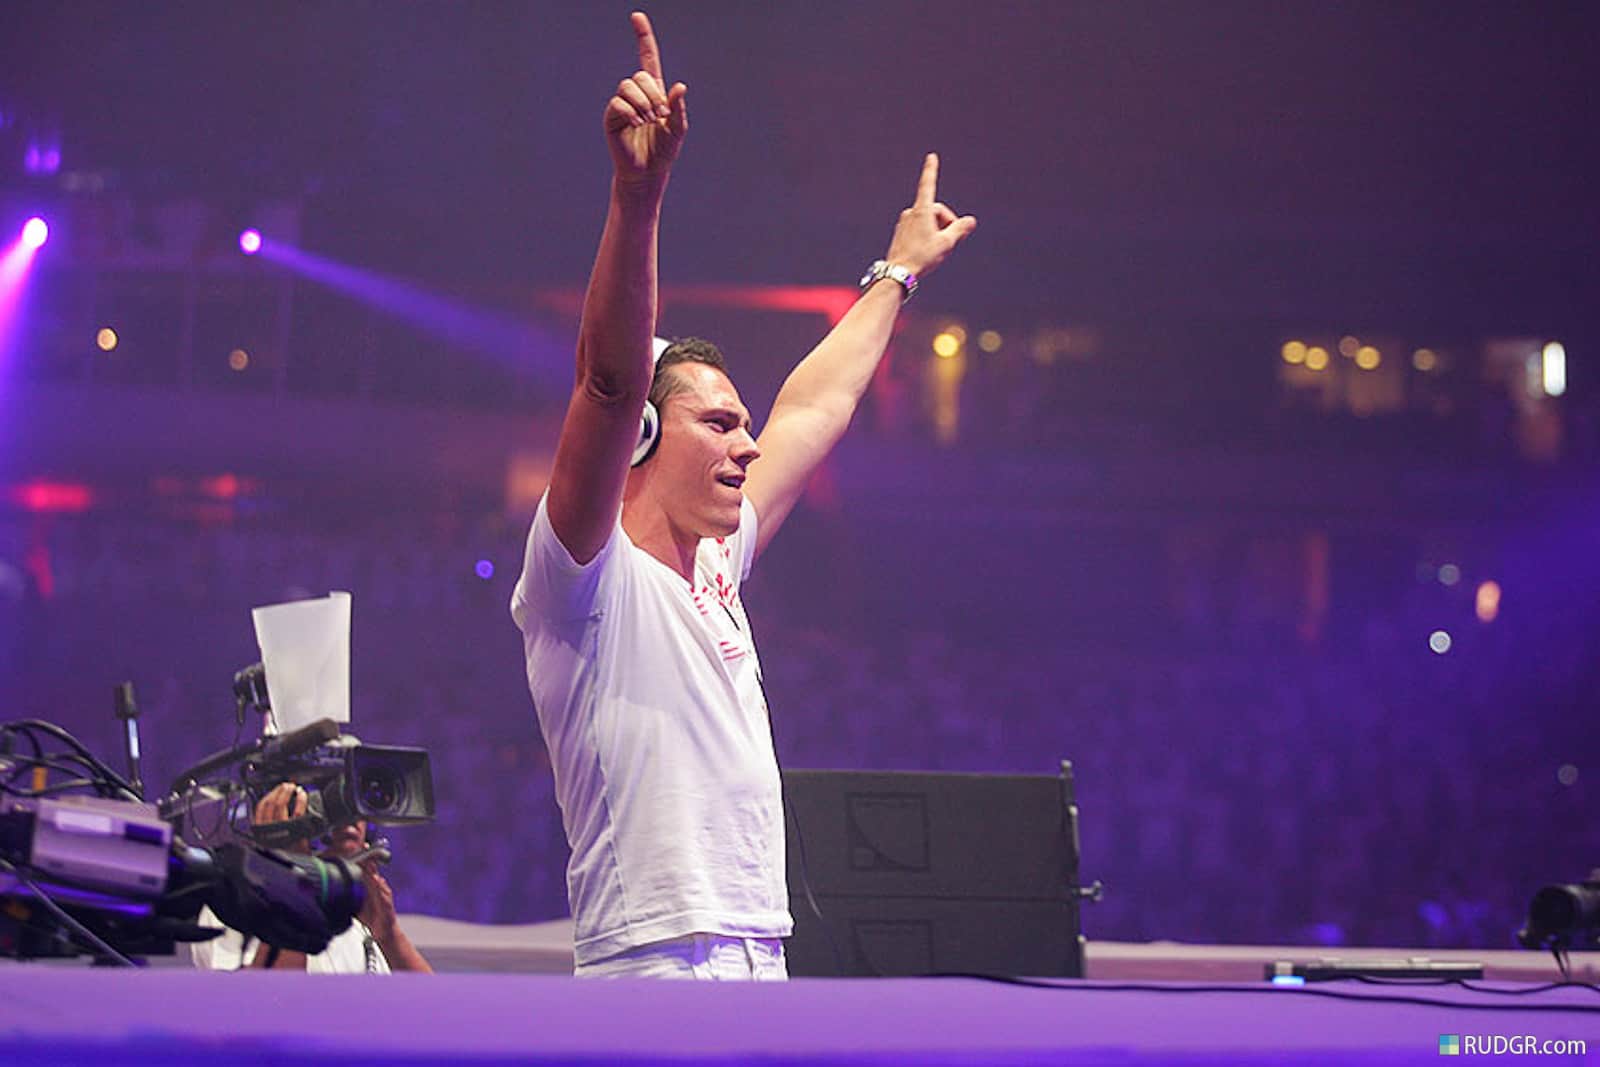 Tiësto at Olympics 2004: Reflecting a Groundbreaking Moment for Dance Music